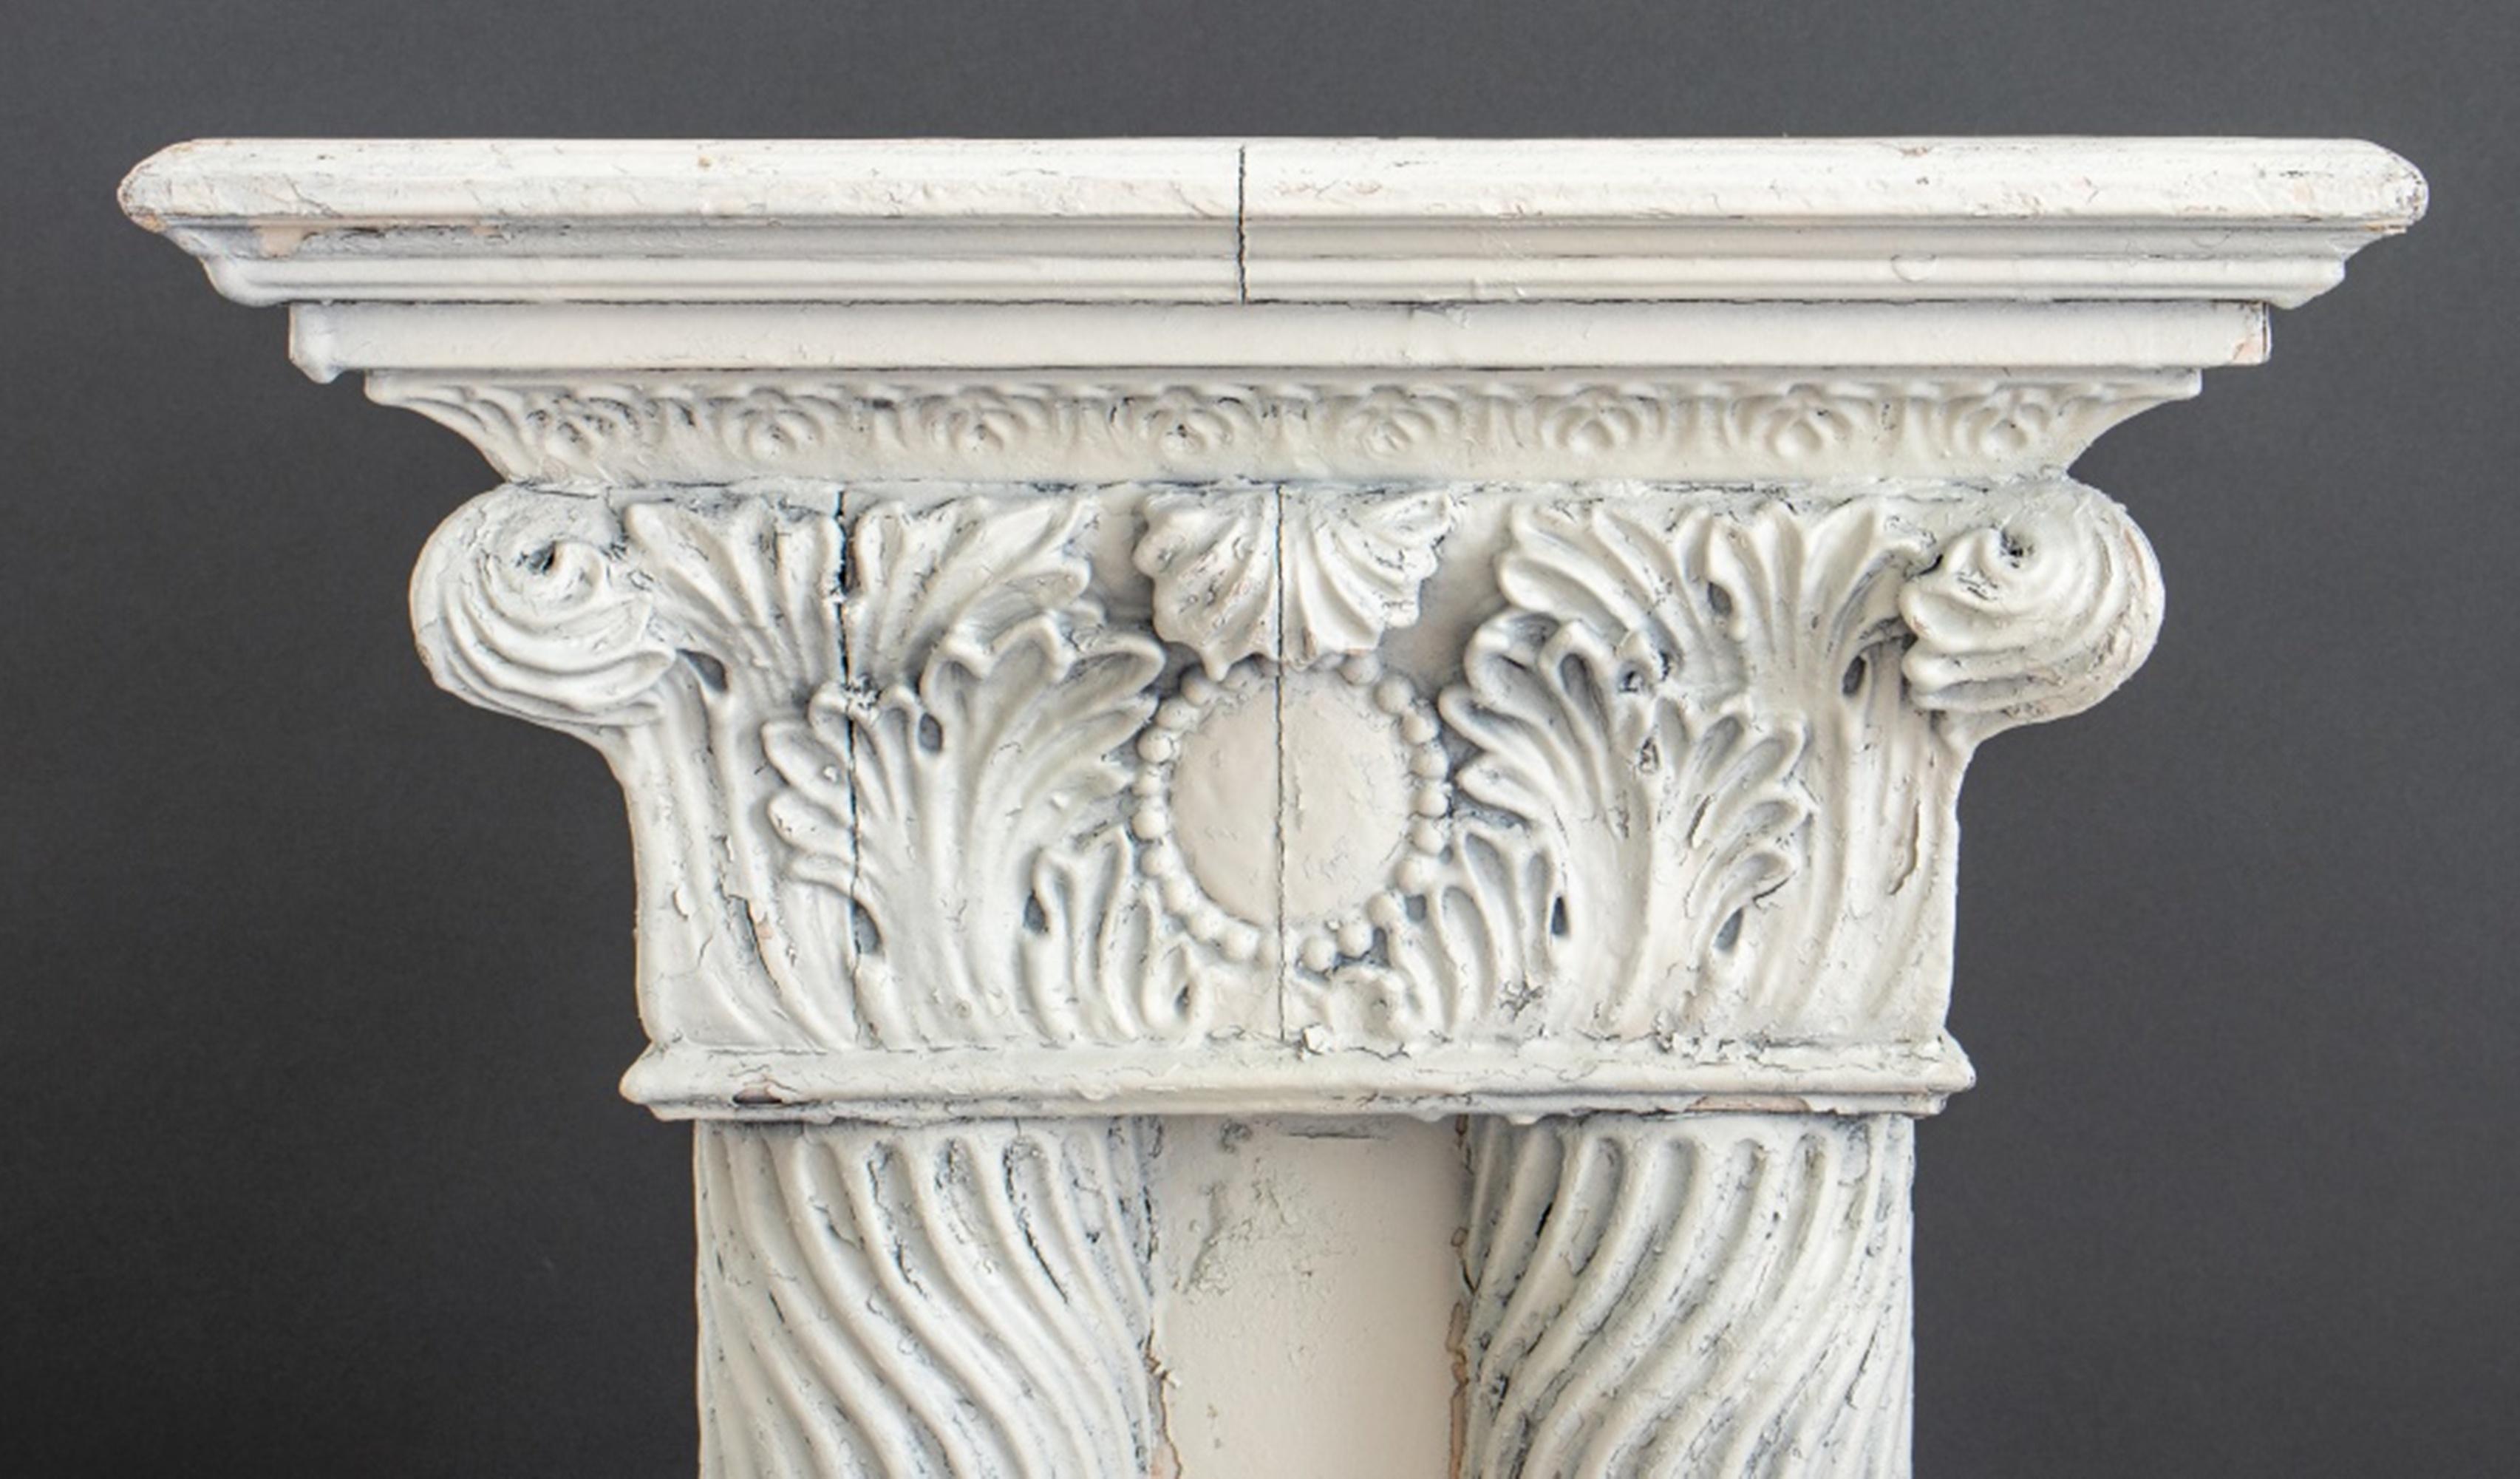 Neoclassical style white painted wood pedestal or plant stand with a Corinthian capital above four carved columns above a square base, circa early twentieth century.

Dimensions: 28